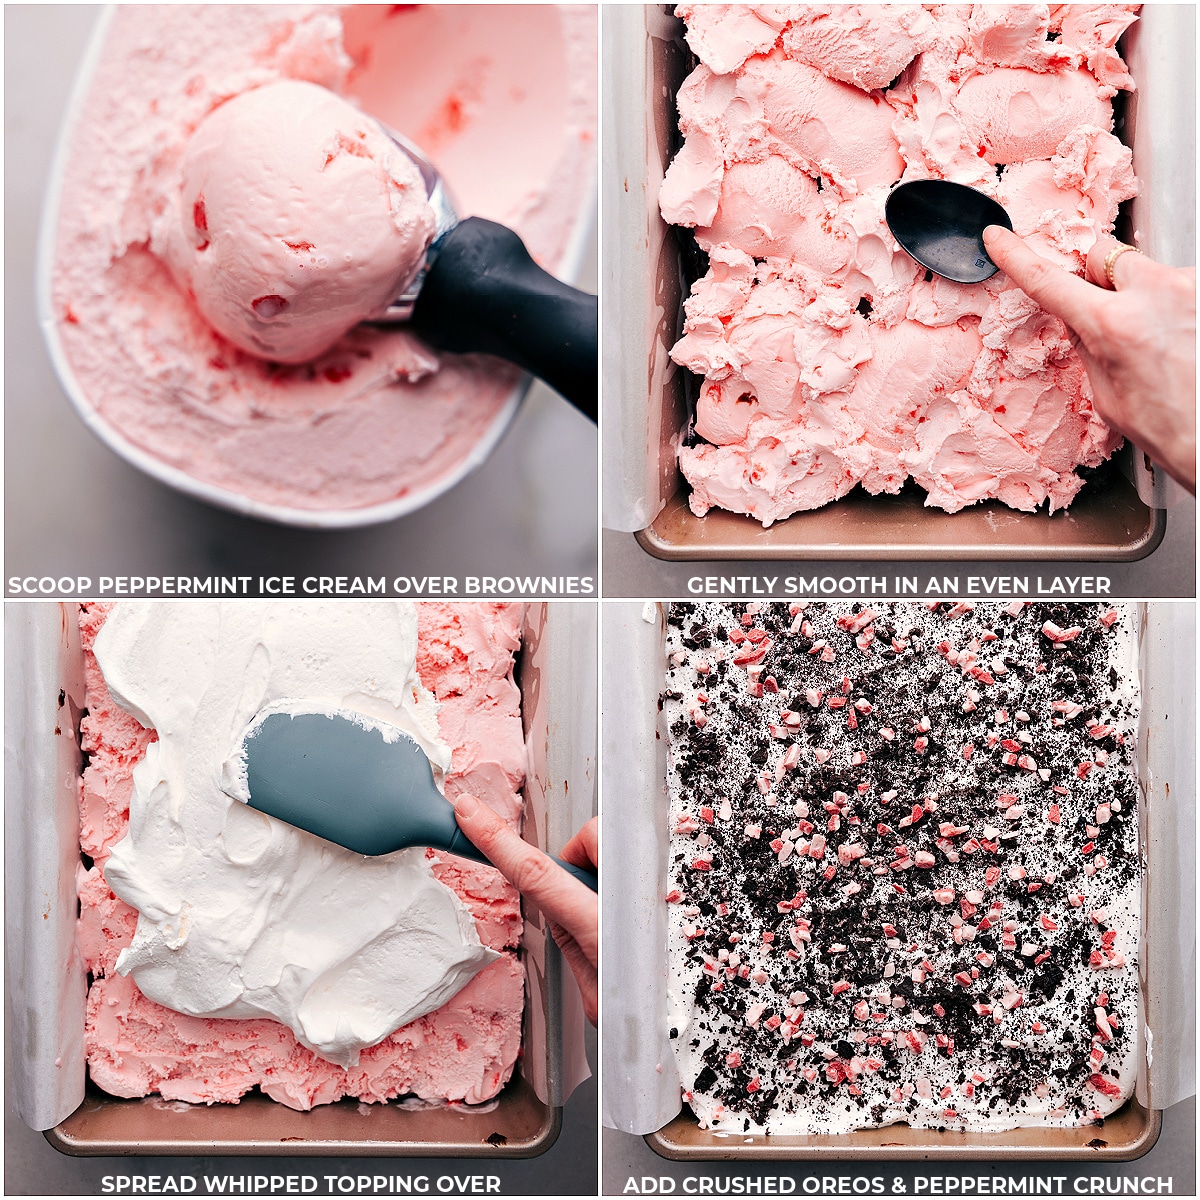 Peppermint ice cream being scooped over cooled brownies and smoothed into an even layer, then topped with a generous amount of whipped topping, crushed Oreos, and peppermint pieces for a festive and indulgent dessert.